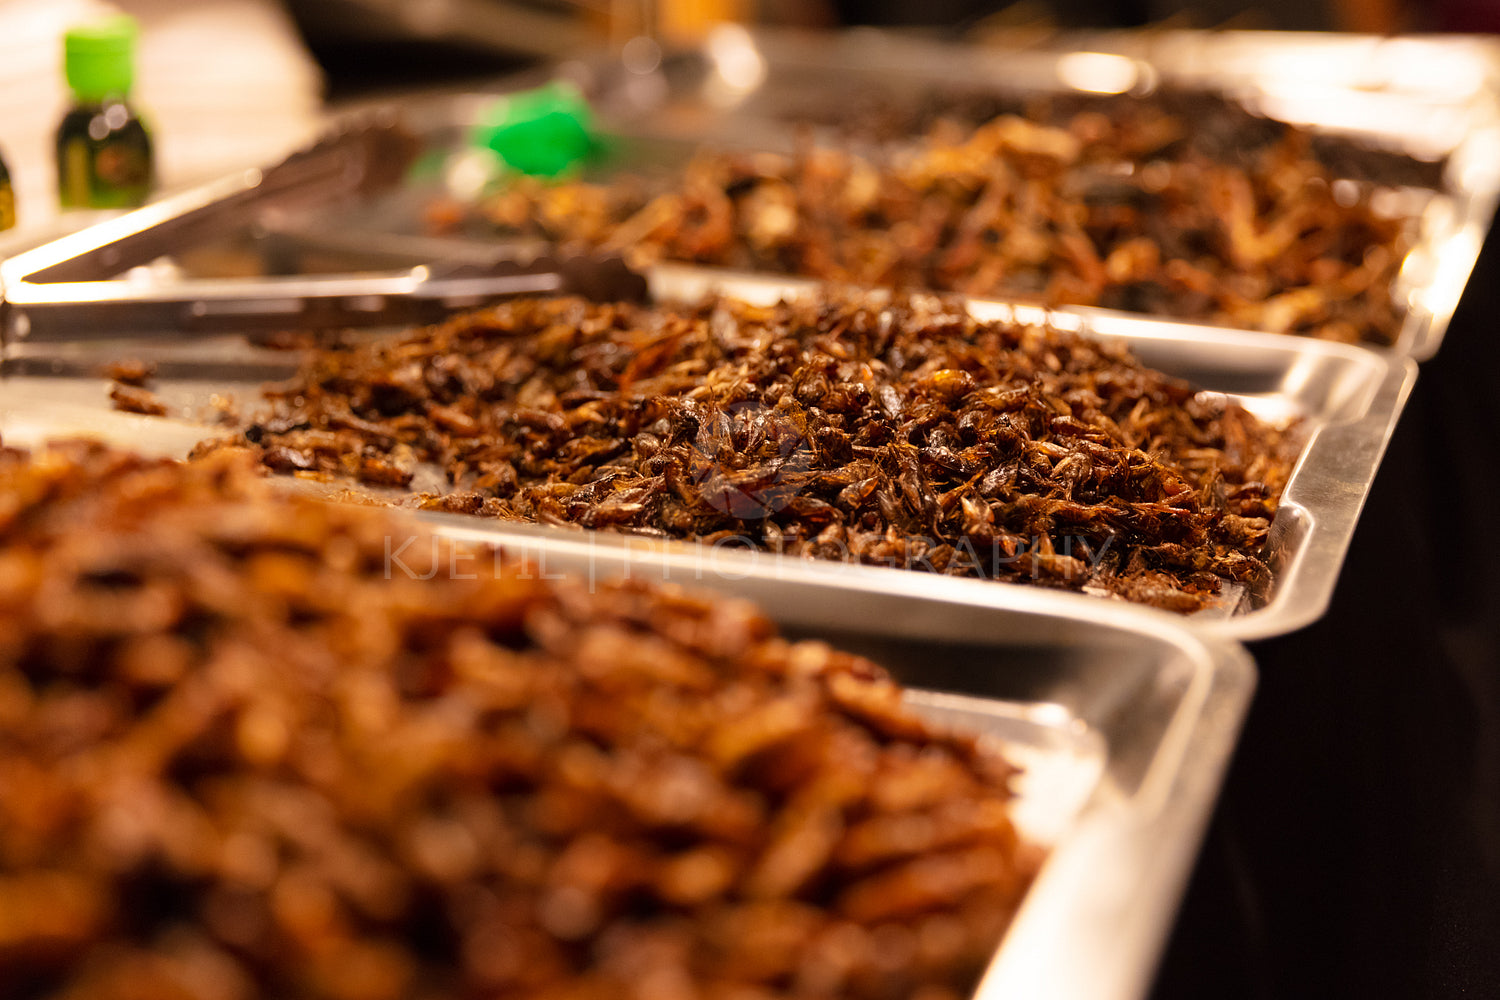 Fried Insects On Trays At Street Market